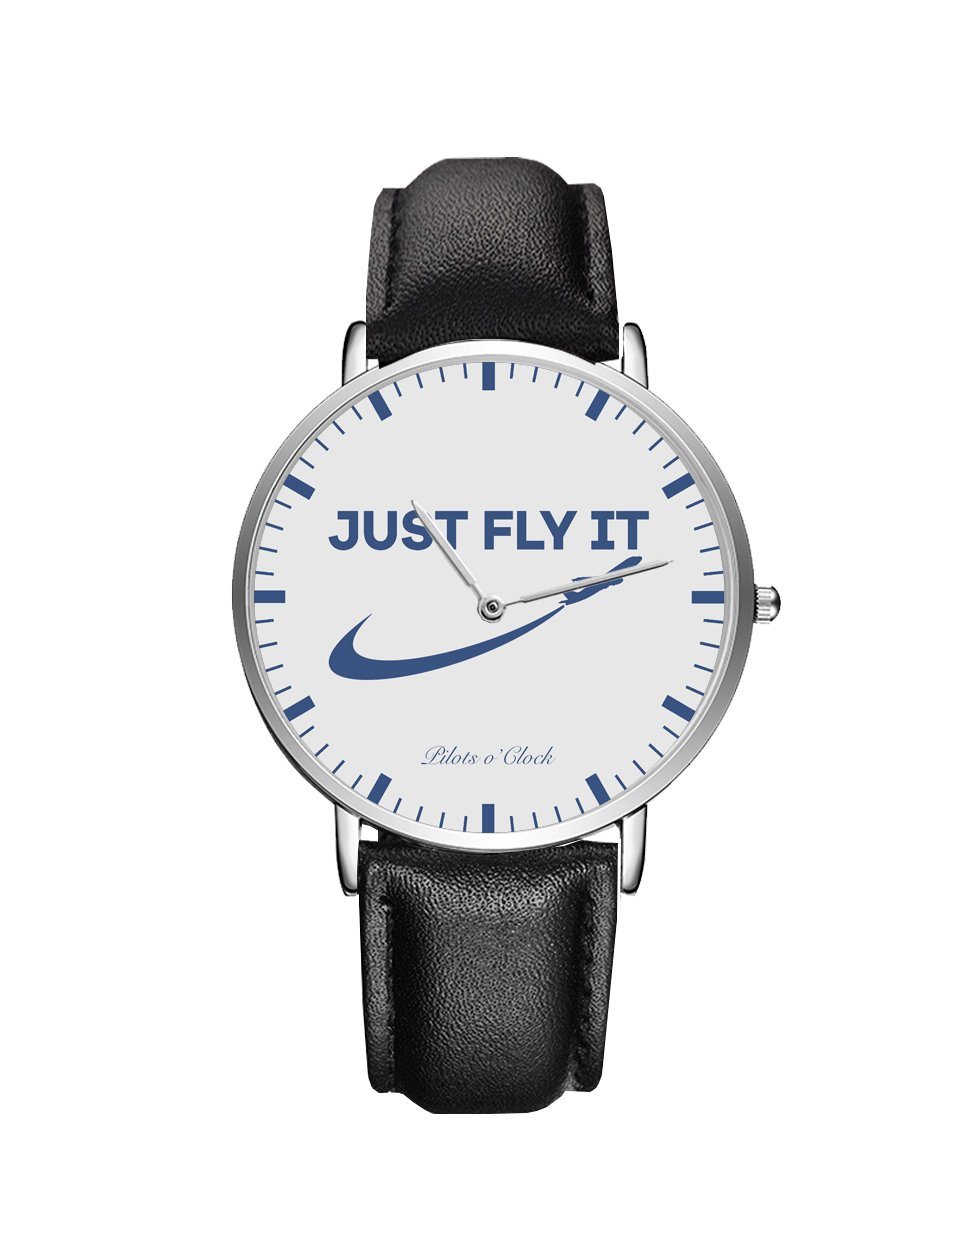 Just Fly It 2 Leather Strap Watches Pilot Eyes Store Silver & Black Leather Strap 